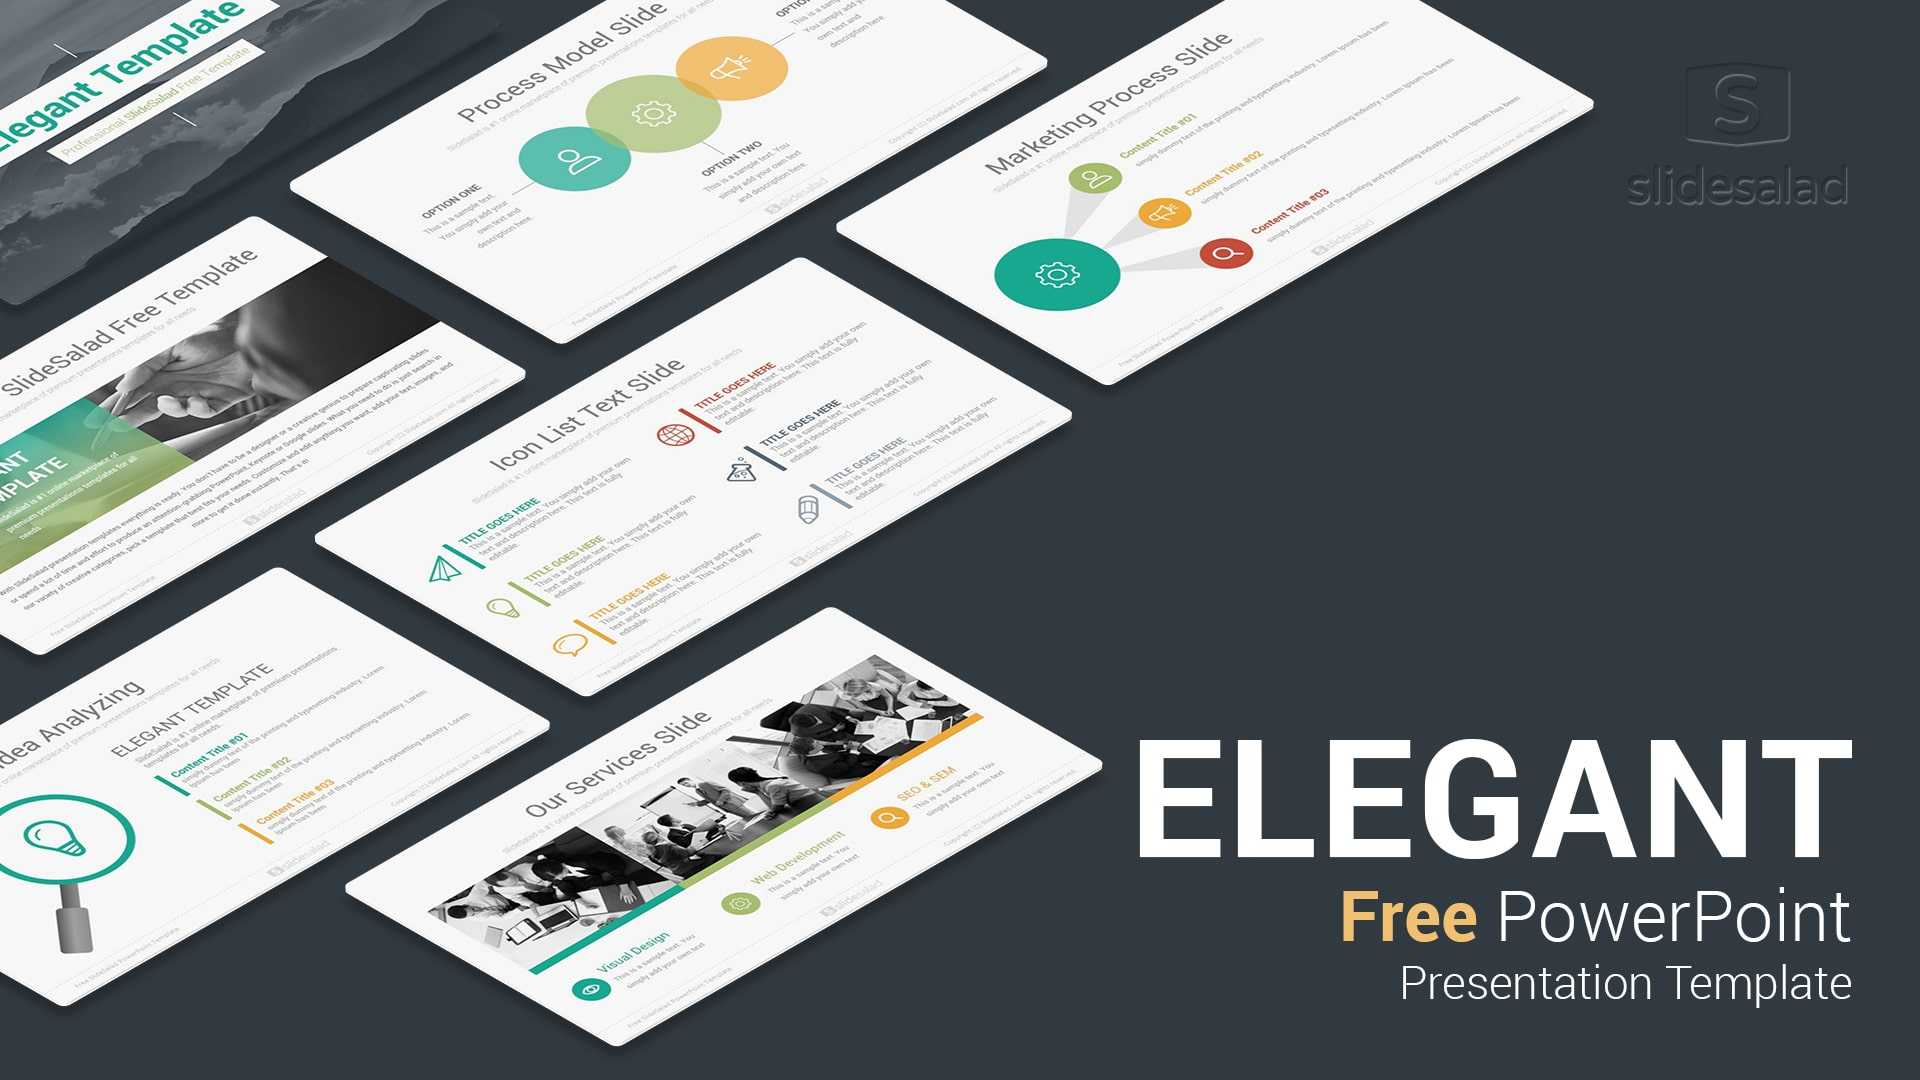 Elegant Free Download Powerpoint Templates For Presentation In Free Powerpoint Presentation Templates Downloads